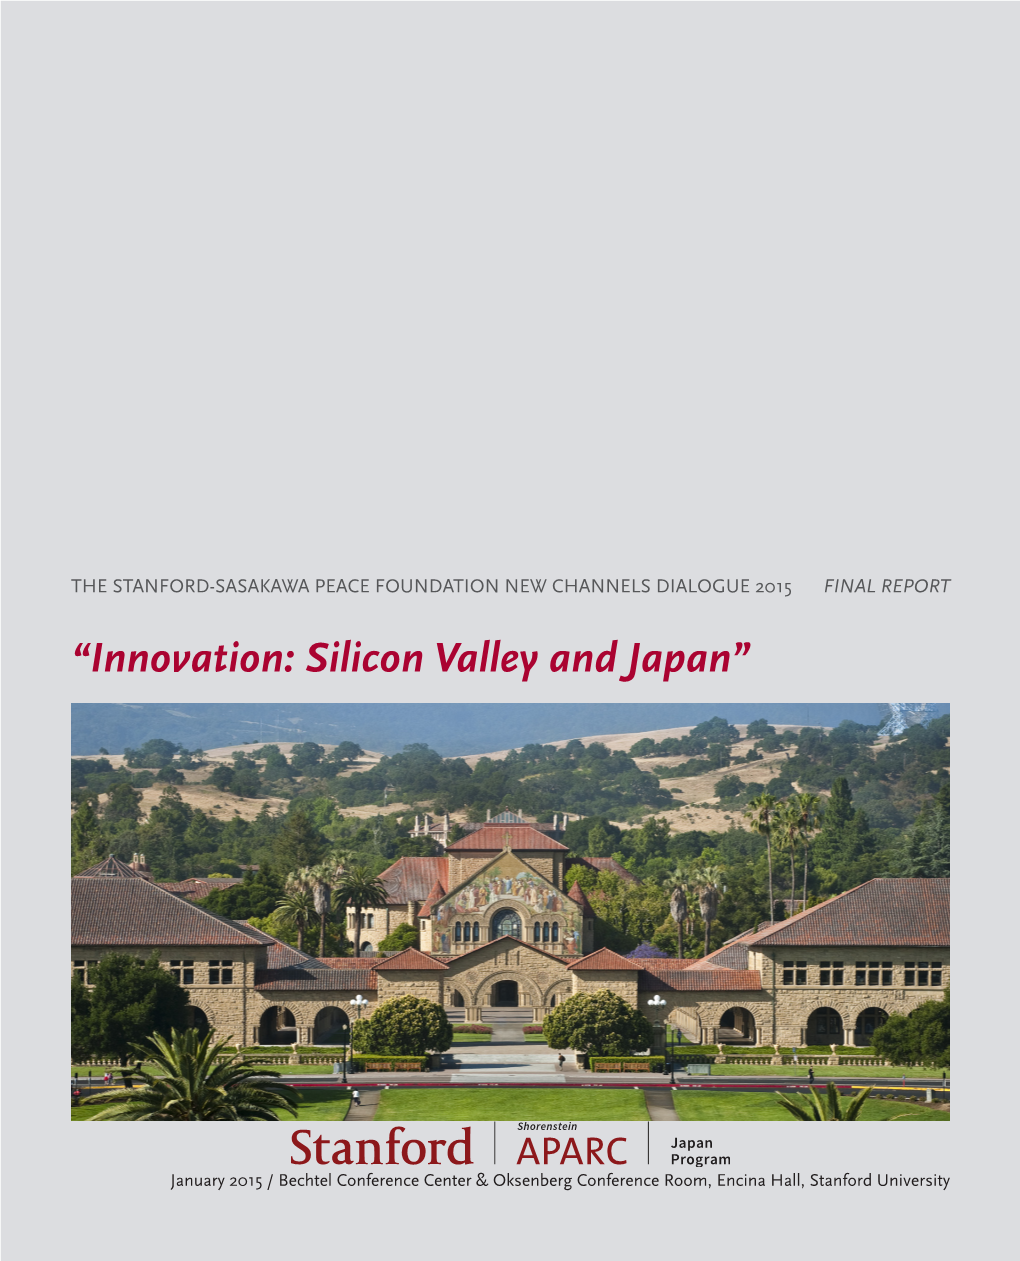 “Innovation: Silicon Valley and Japan”